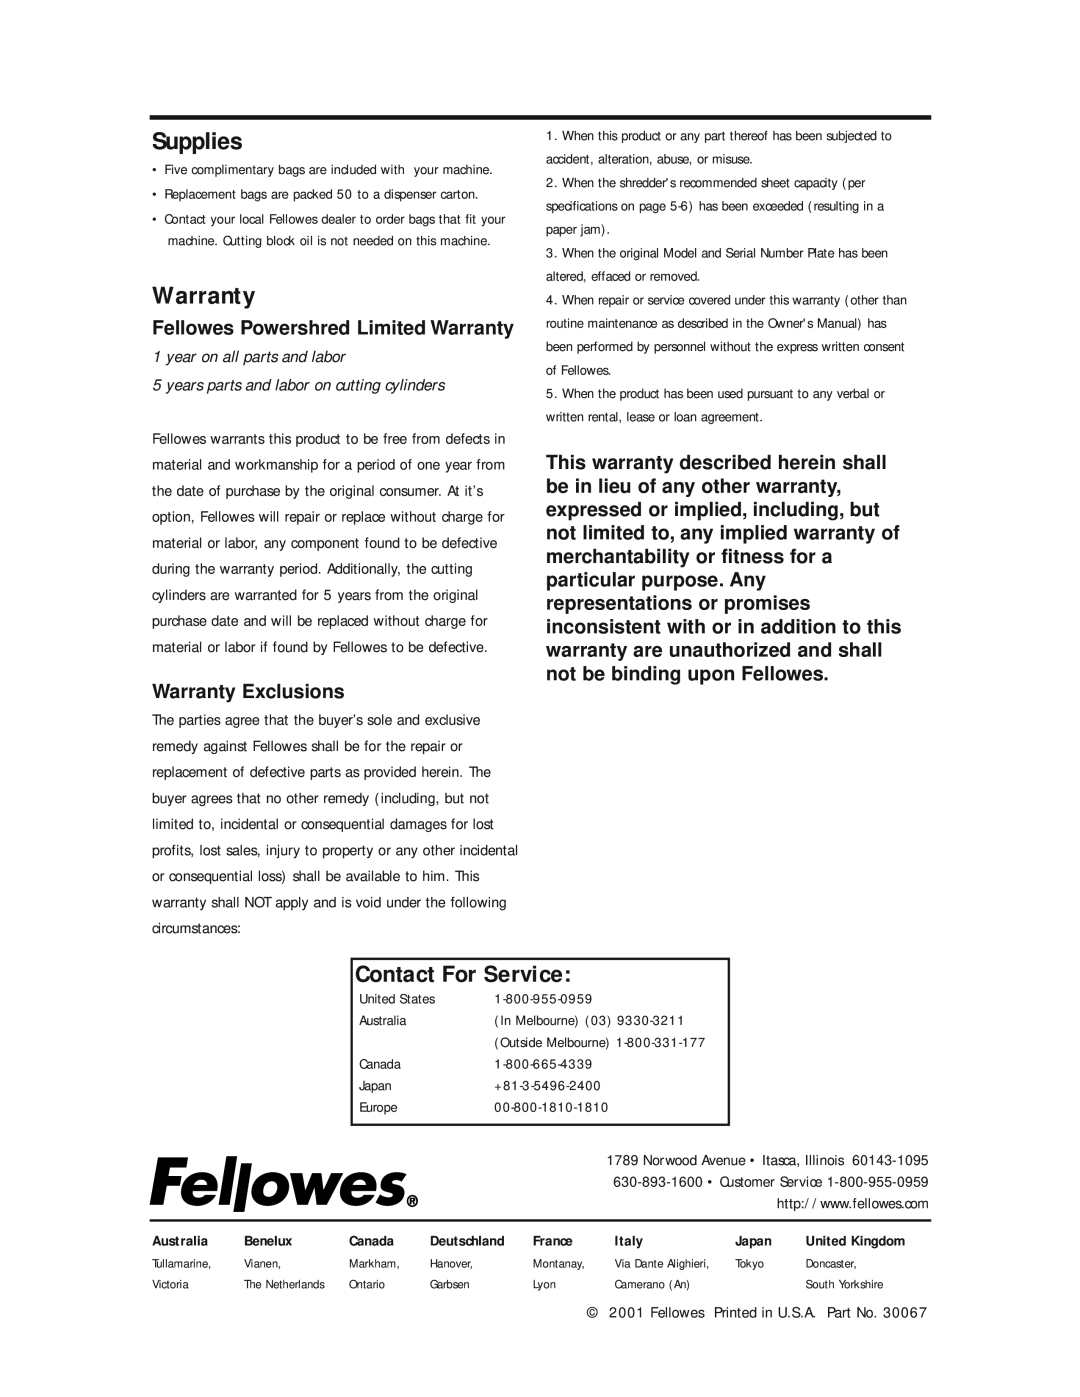 Fellowes S40C Supplies, Fellowes Printed in U.S.A. Part No, Fellowes Powershred Limited Warranty, Warranty Exclusions 